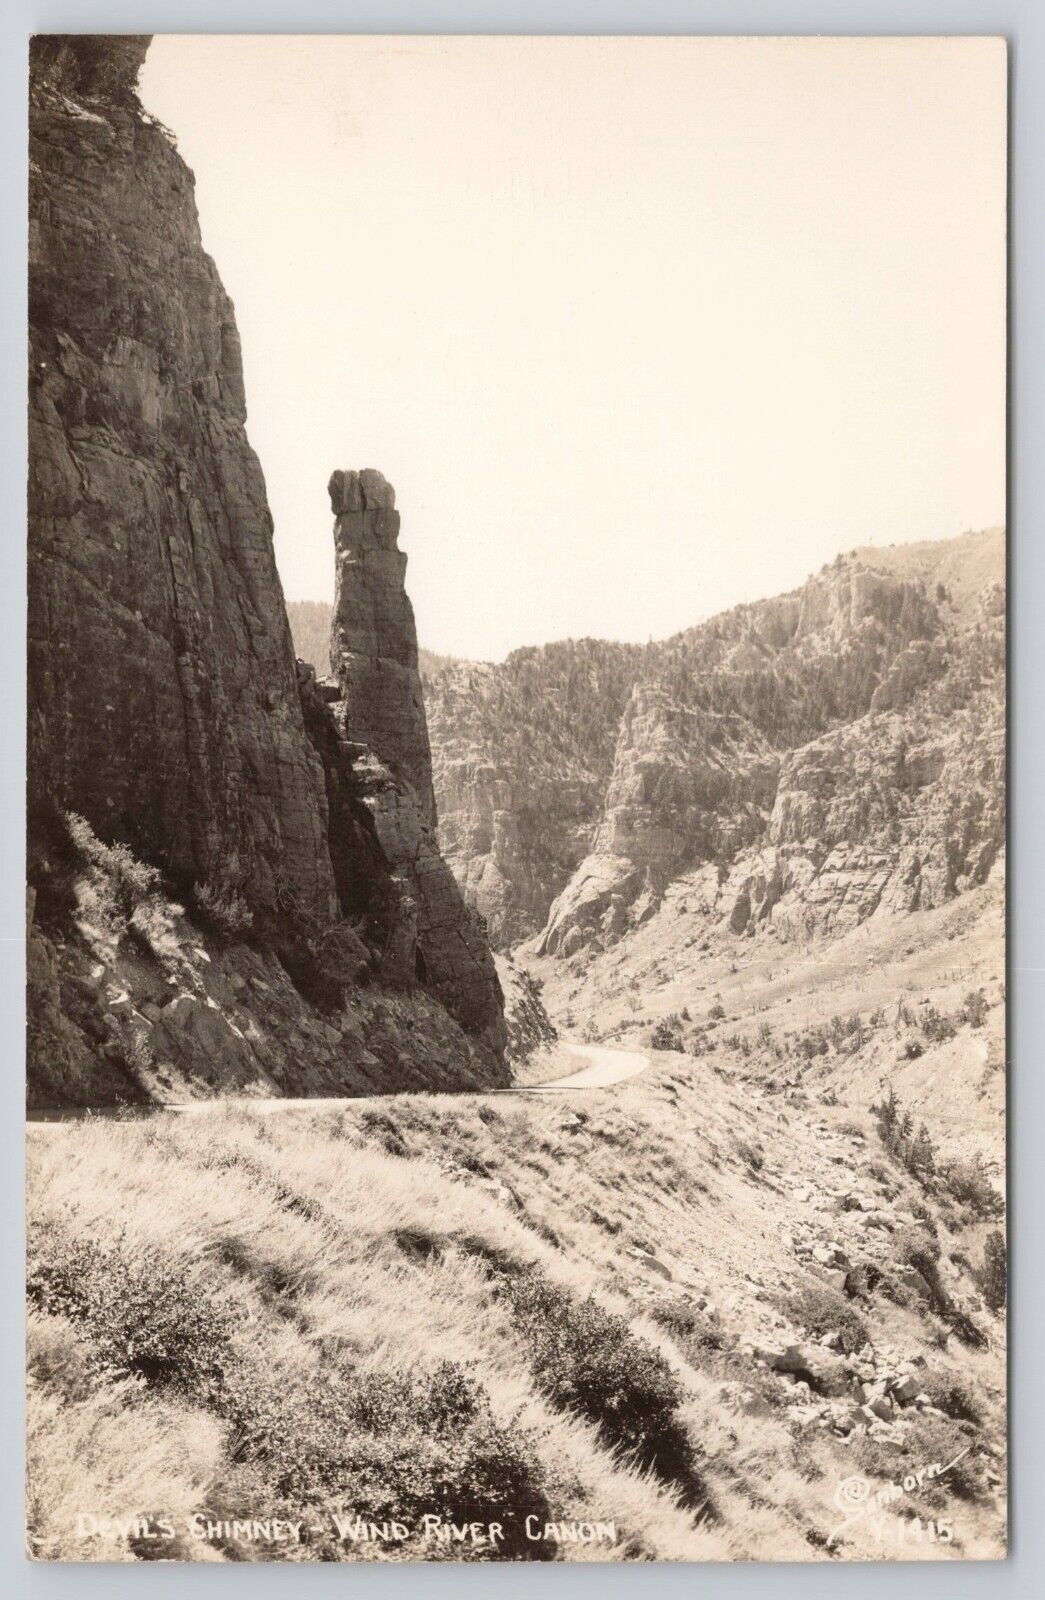 Devils Chimney Wind River Canyon Wyoming Real Photo RPPC Postcard